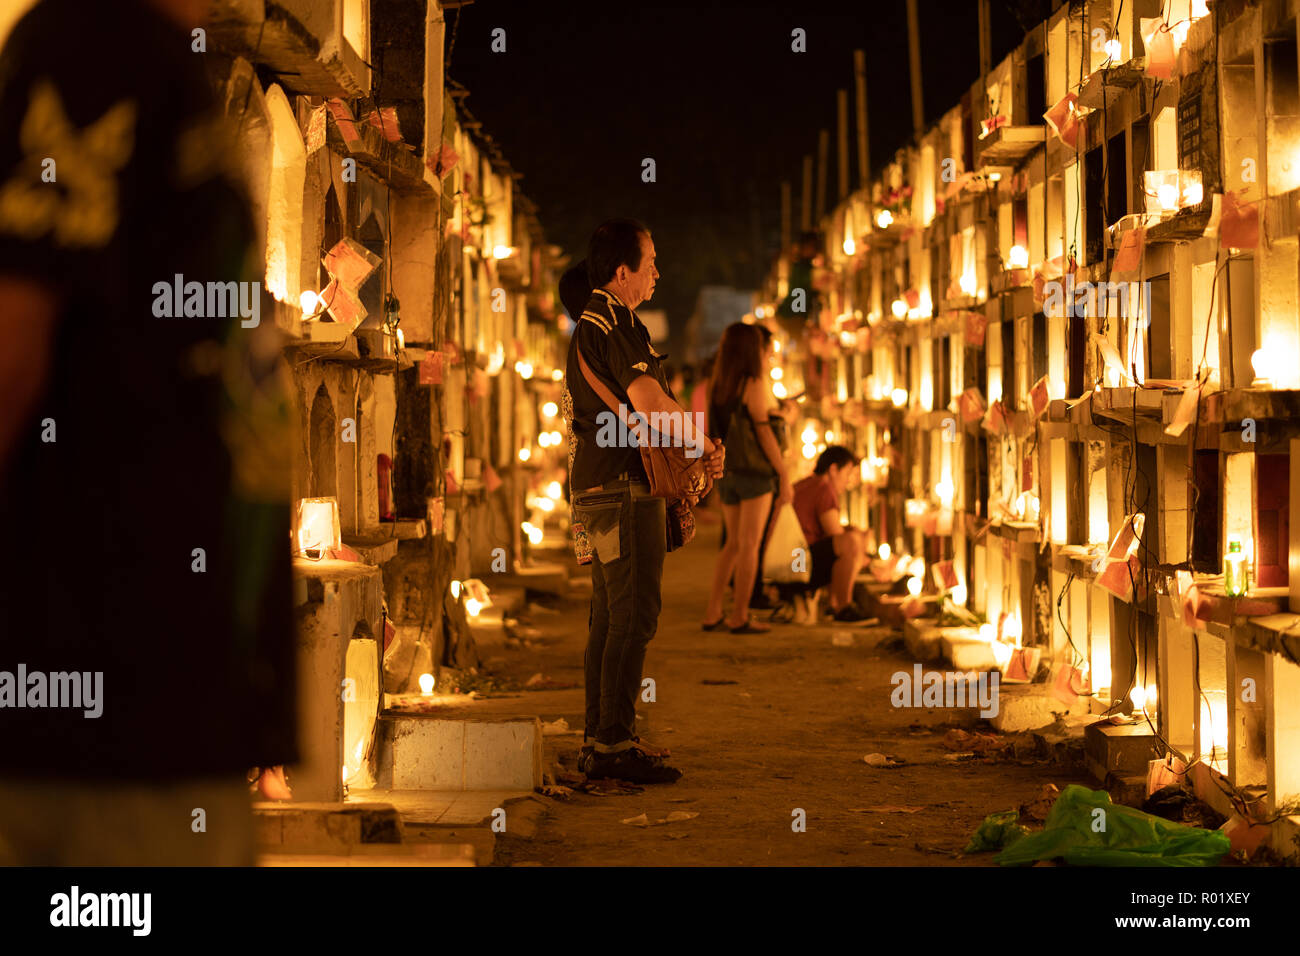 Carreta Cemetery, Cebu City, Philippines. 31st Oct, 2018. Millions of Filipinos will be visiting cemeteries & paying their respects to deceased loved ones in the Philippines this week, known as All Saints & All Souls Day, respectively taking place on the 1st & 2nd November. Credit: imagegallery2/Alamy Live News Stock Photo